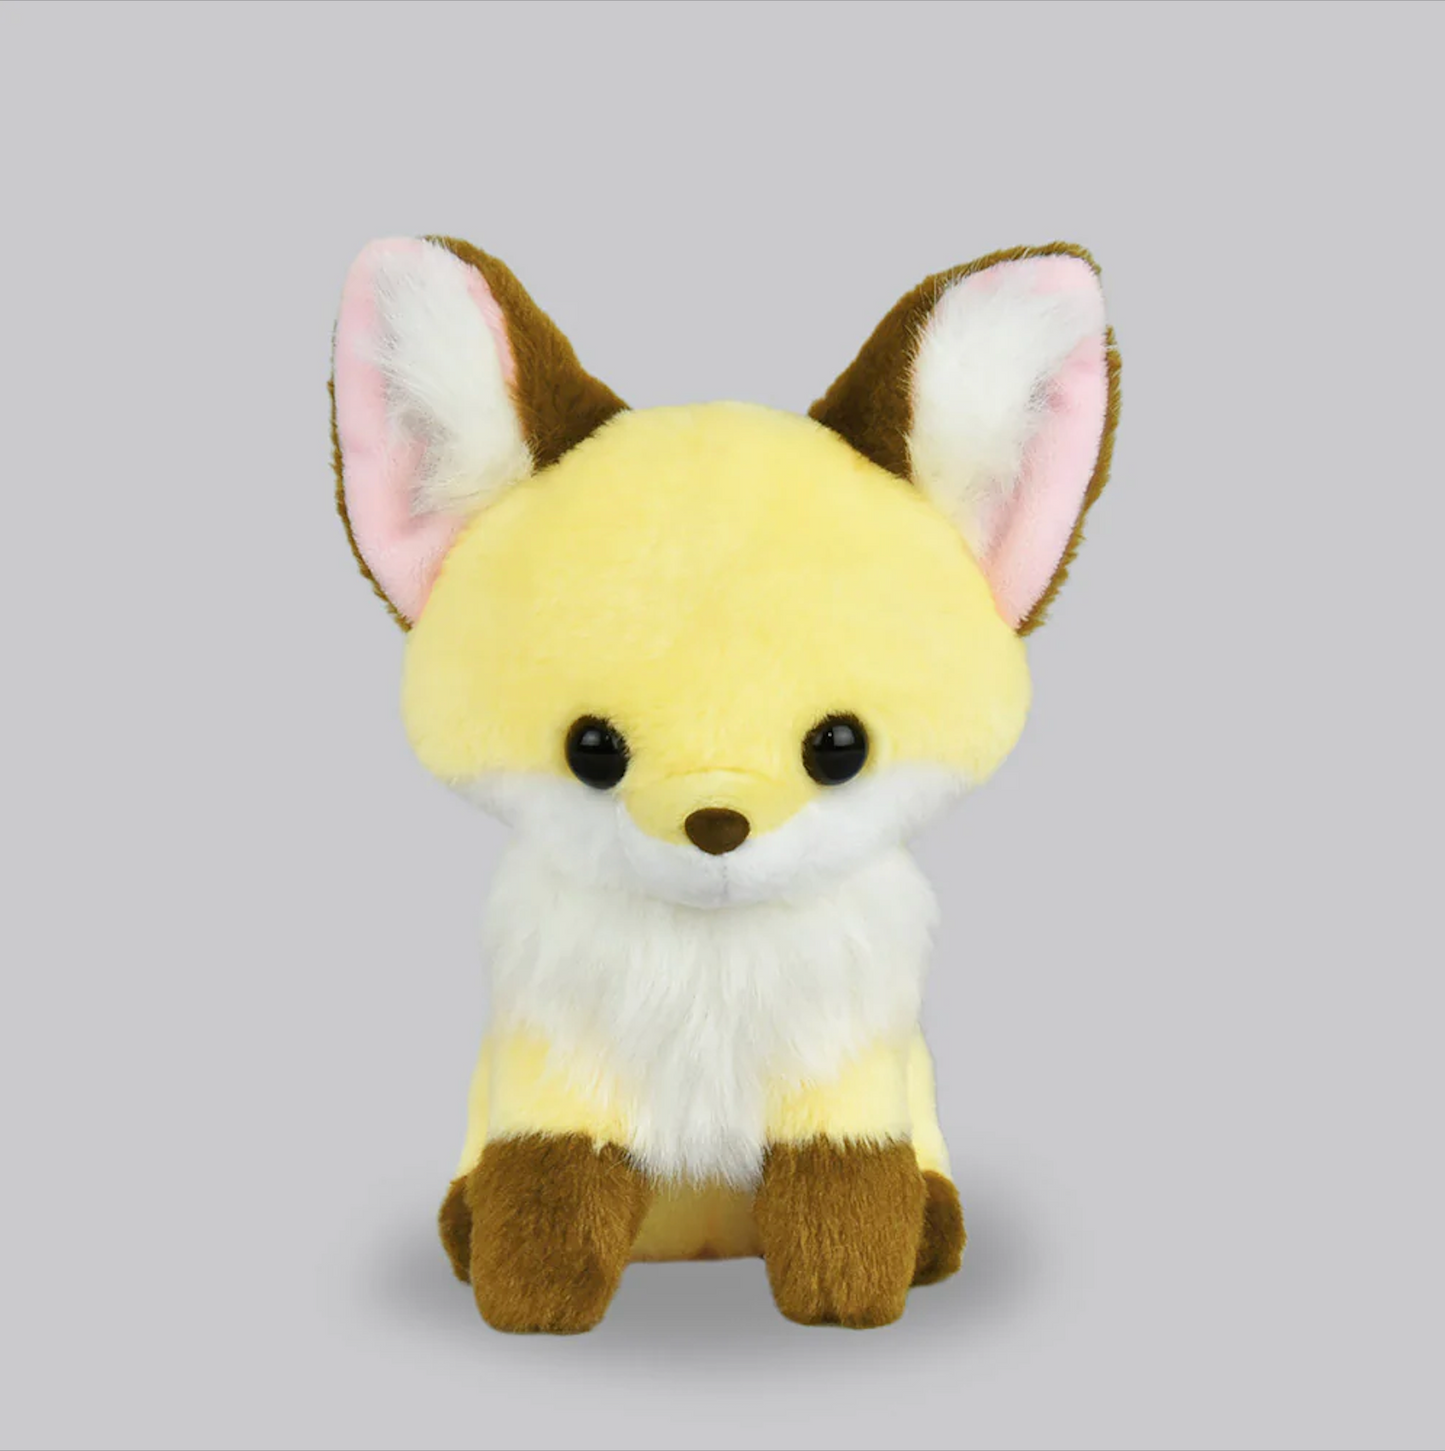 Amuse Fox 8” inch Plush Adorable Soft Stuffed Animals Plush Toys, Gifts for Kids